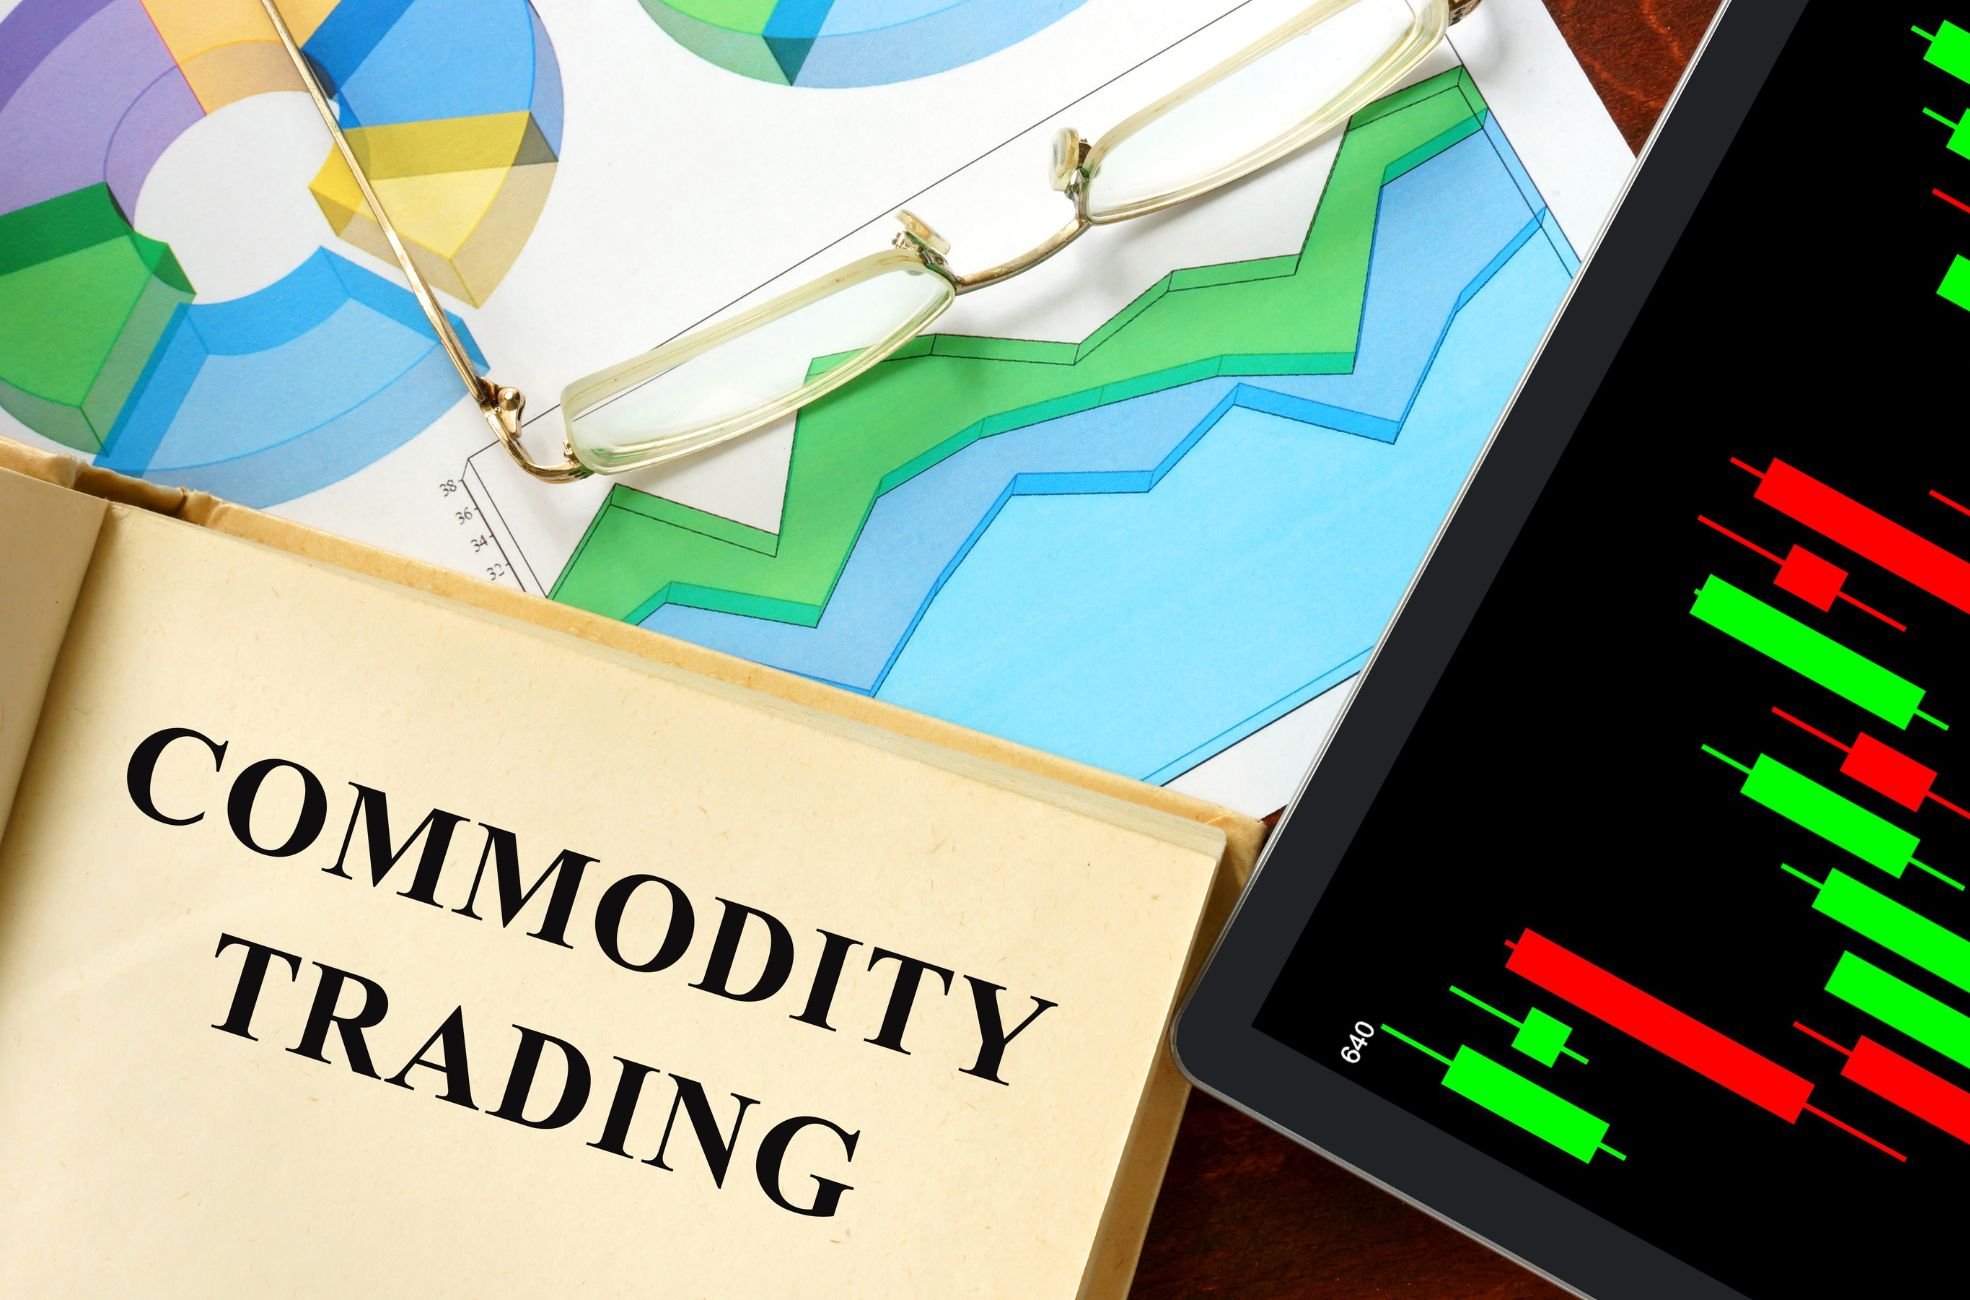 Stock Photo of Trading Commodities